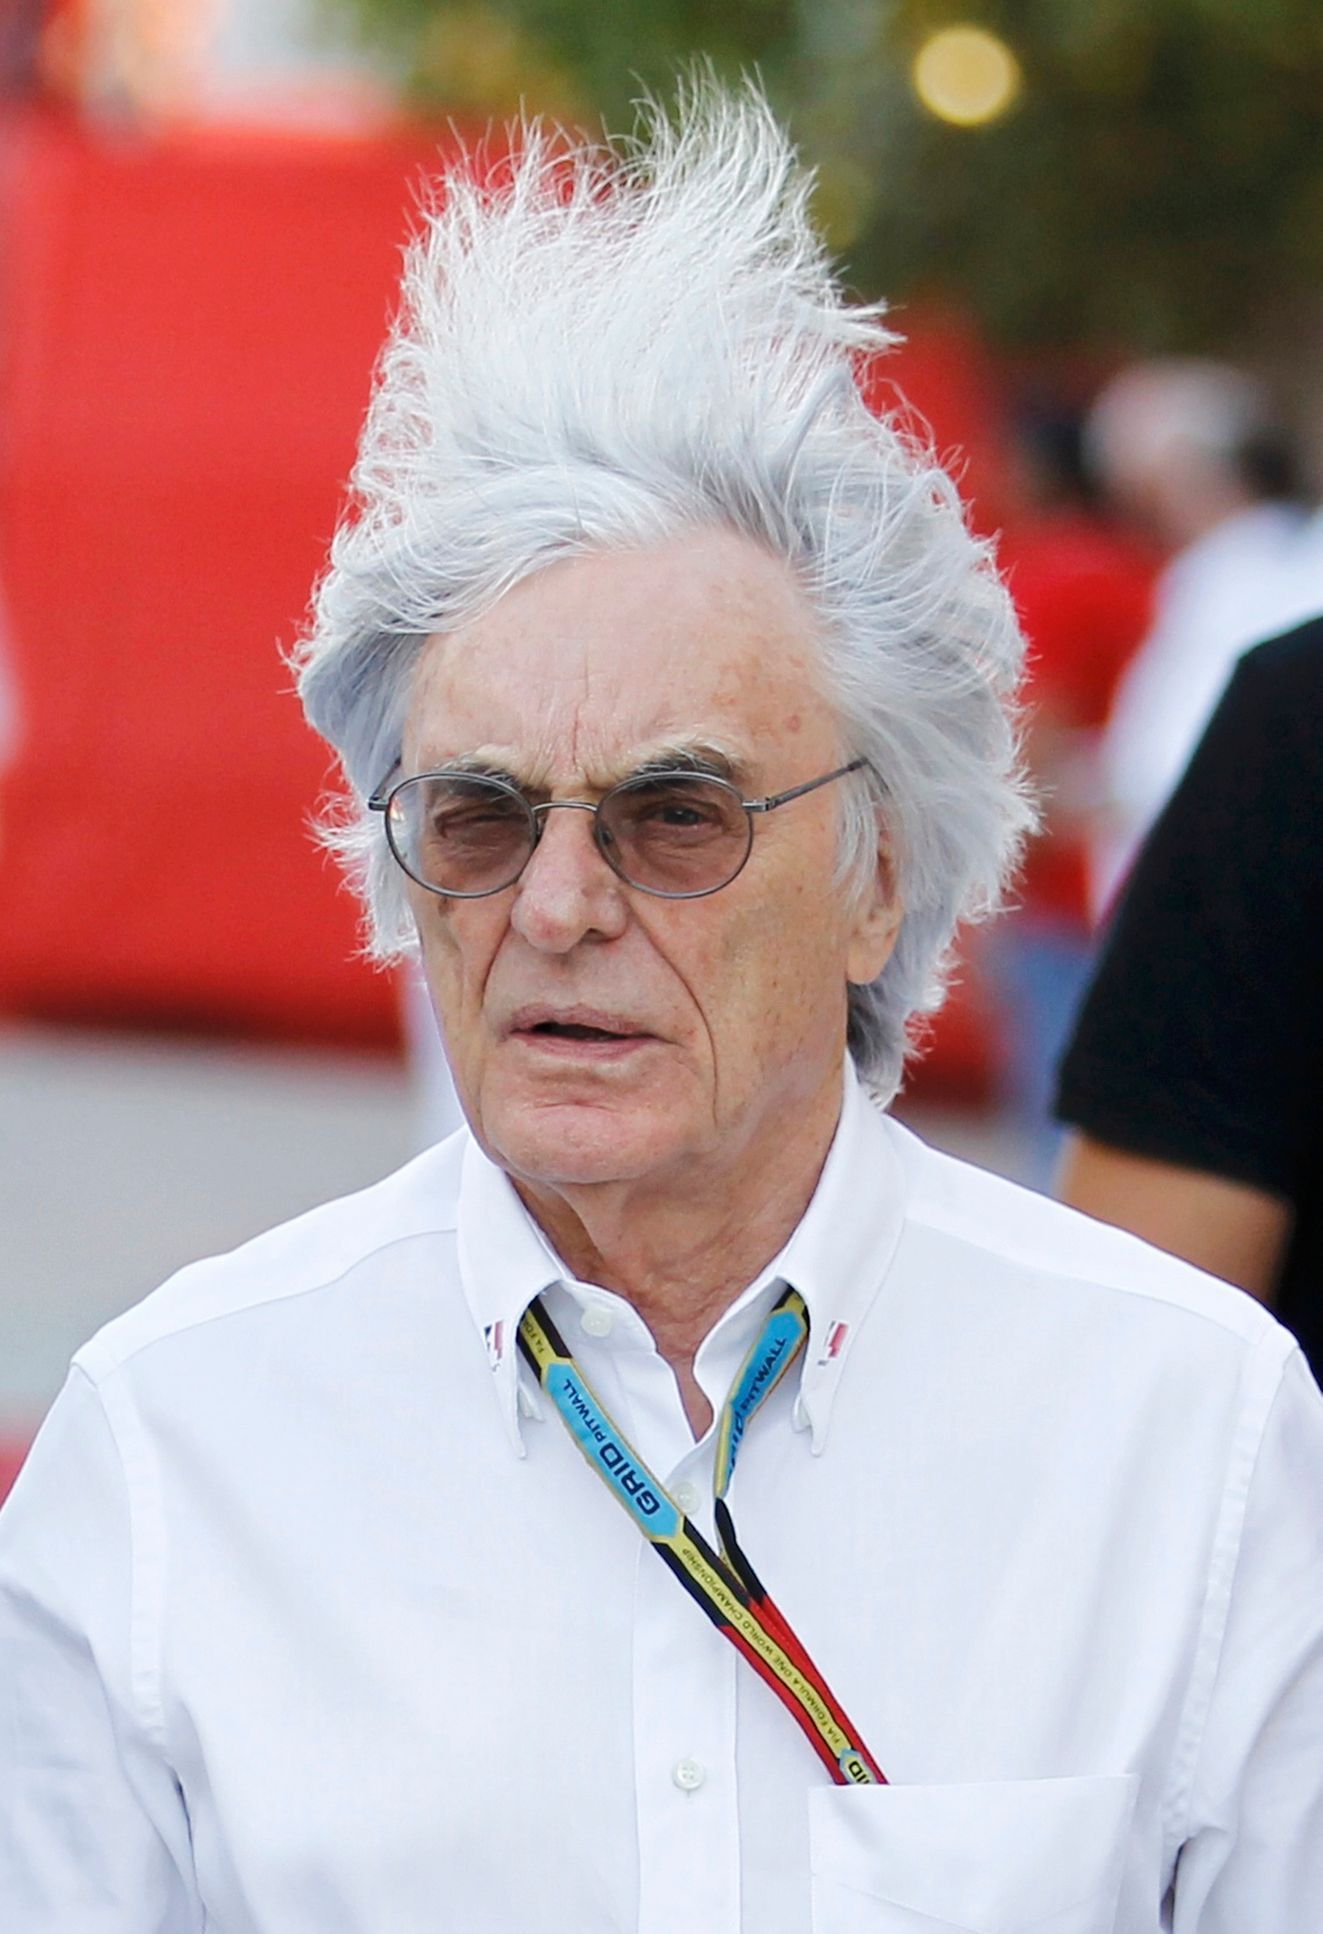 Formula One commercial supremo Bernie Ecclestone's hair blows in the wind as he walks at the paddock after the third practice session of the Bahrain F1 Grand Prix at the Bahrain International Circuit